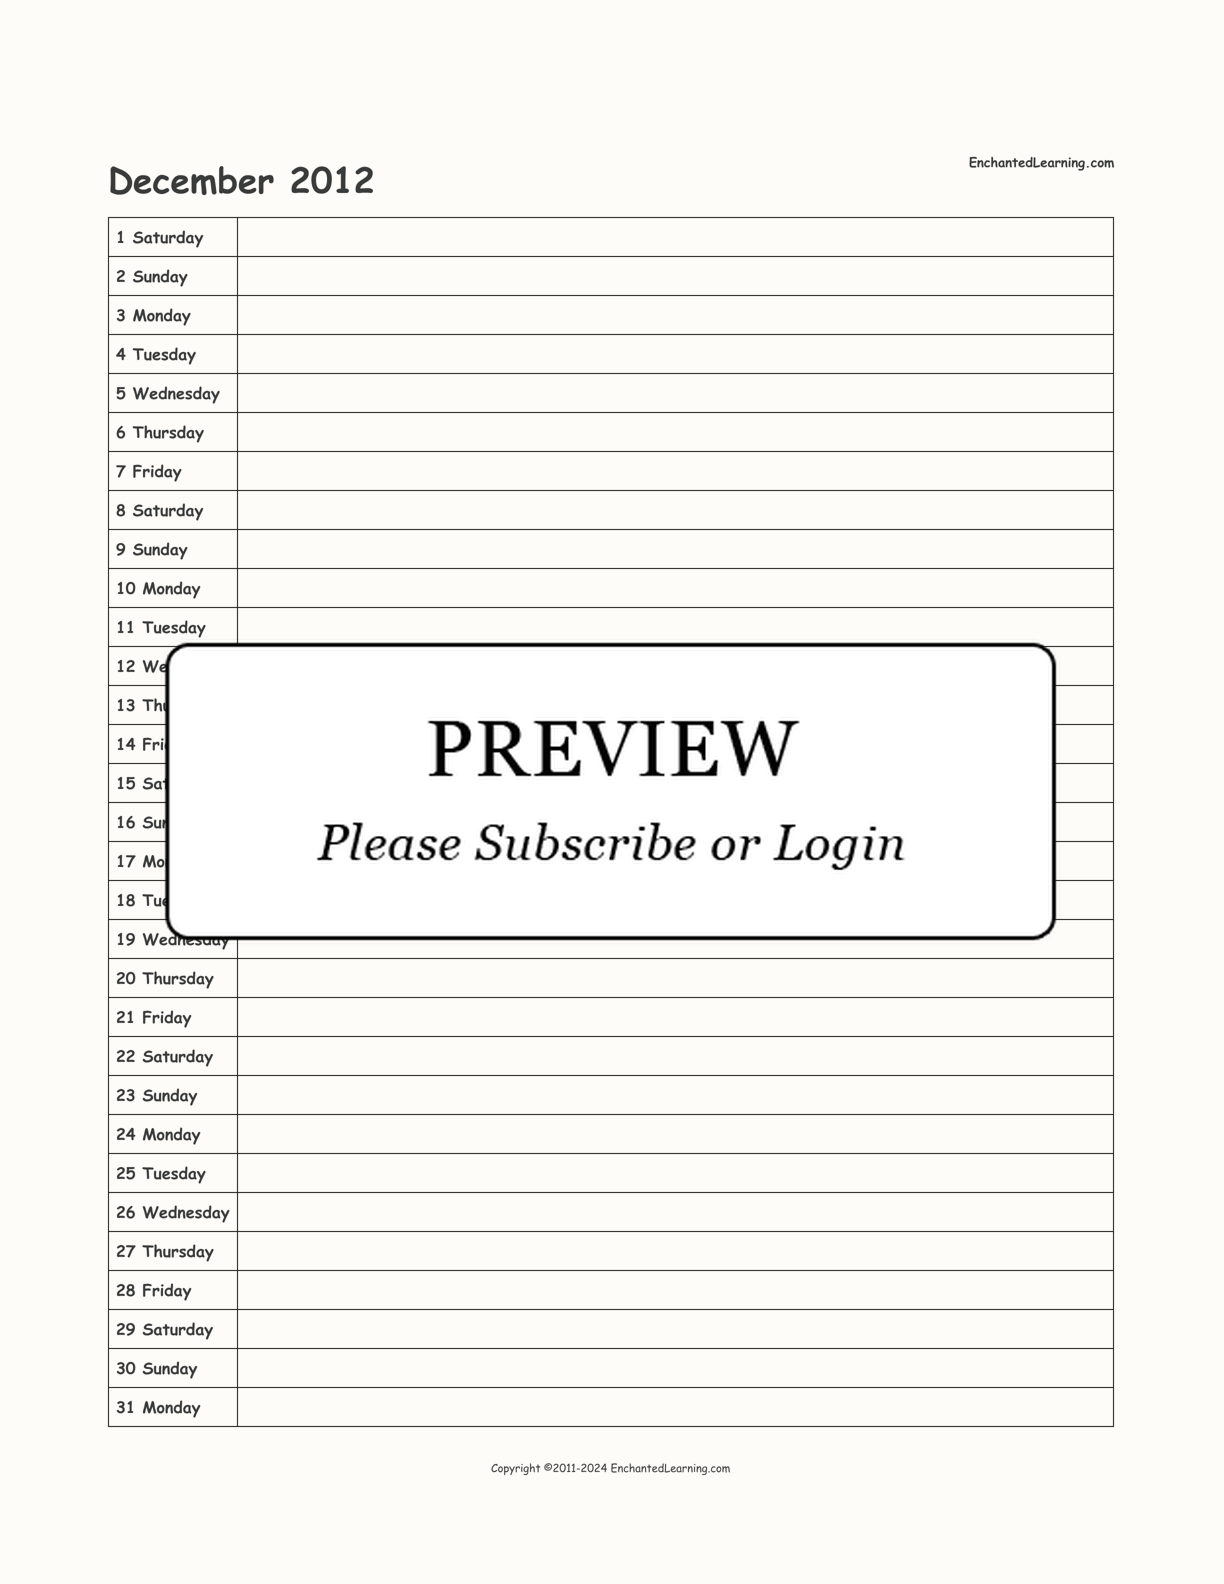 2012 Scheduling Calendar interactive printout page 12